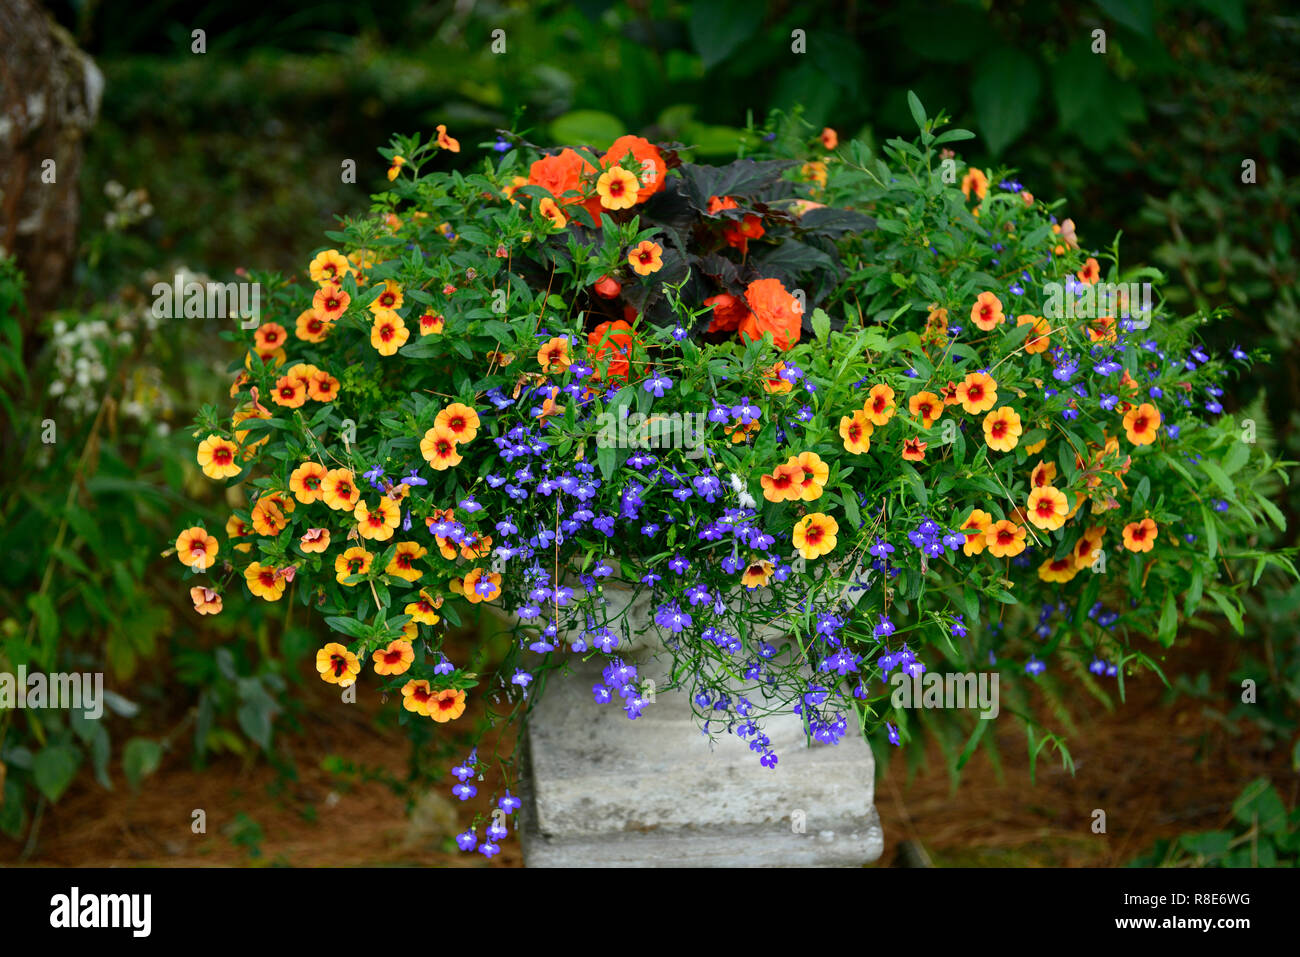 lobelia,bacopa,begonia,blue,orange,red,yellow,flower,flowers,display,urn,formal,garden,gardening,mix,mixed,container,planter,foliage,RM Floral Stock Photo